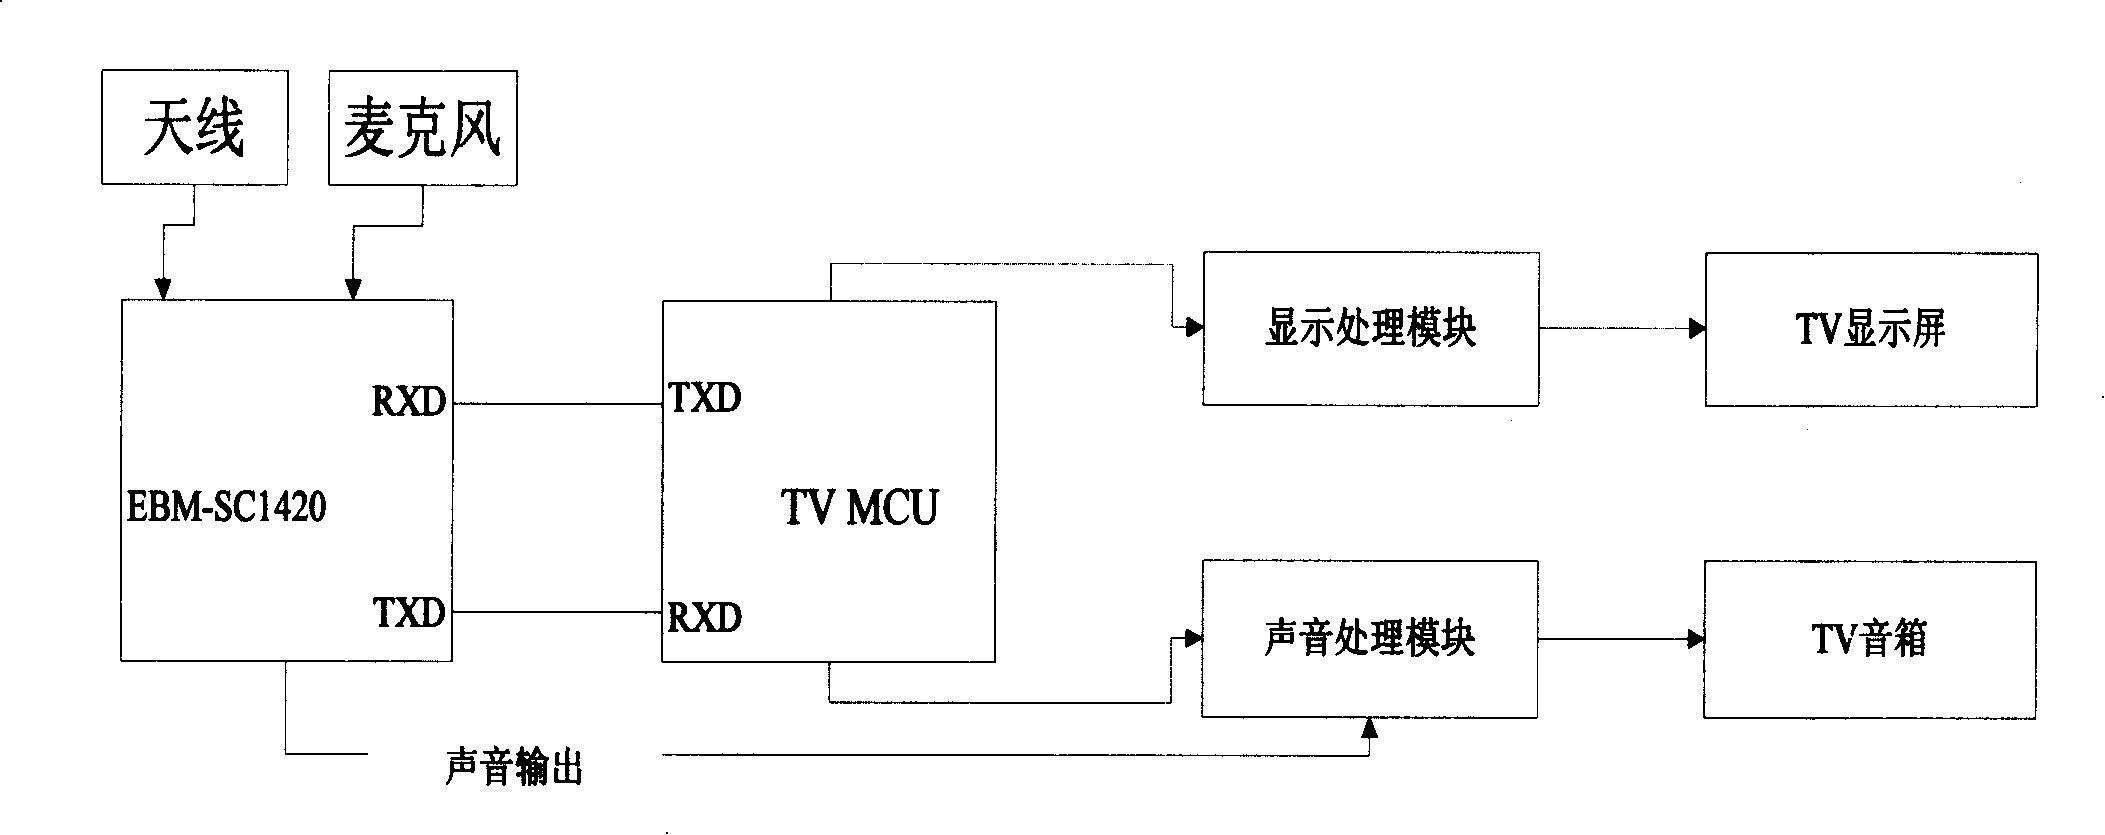 Tv set for controlling blue tooth mobile phone